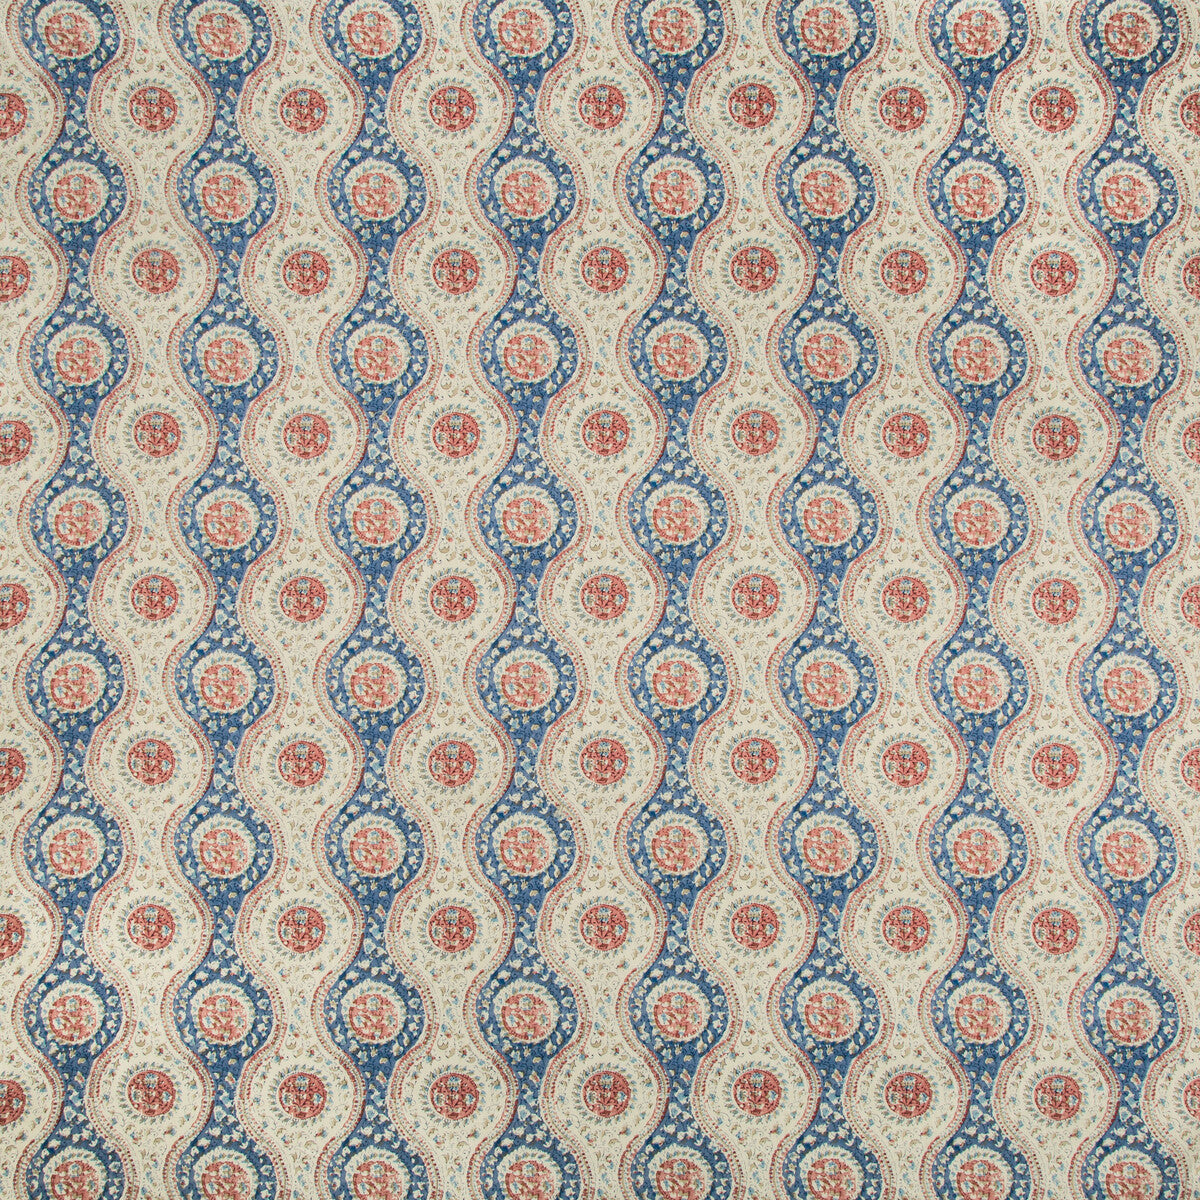 Nadari Print fabric in blue/red color - pattern 8019129.519.0 - by Brunschwig &amp; Fils in the Folio Francais collection